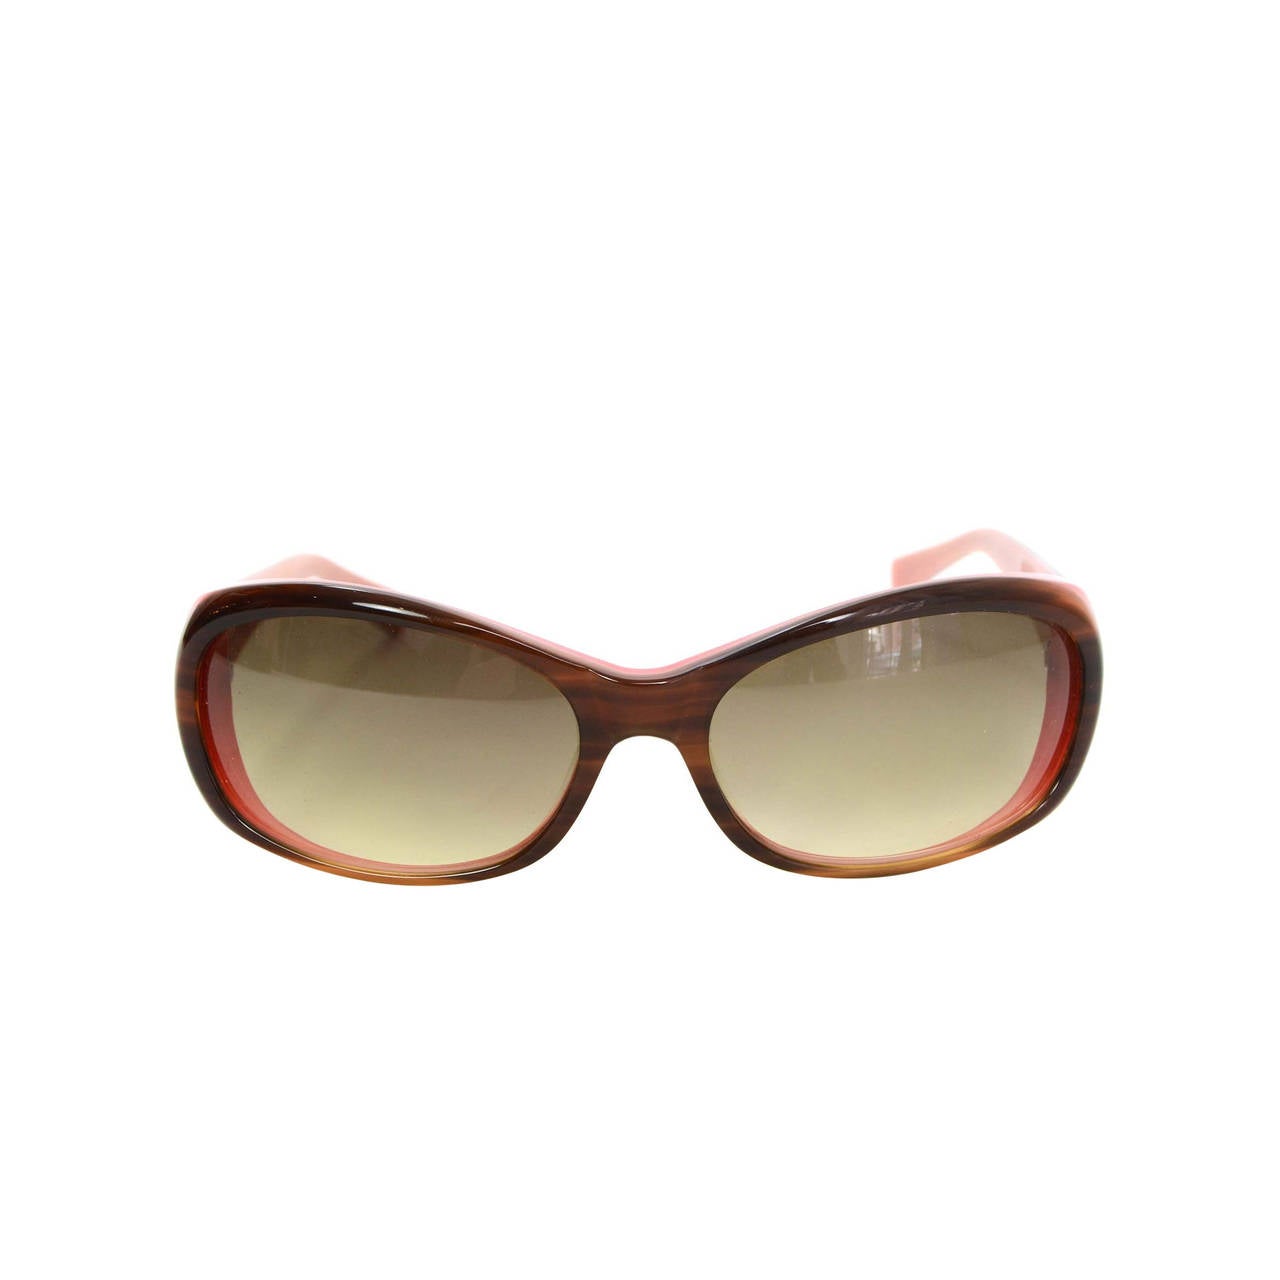 OLIVER PEOPLES Brown & Pink "Phoebe" Oval Sunglasses